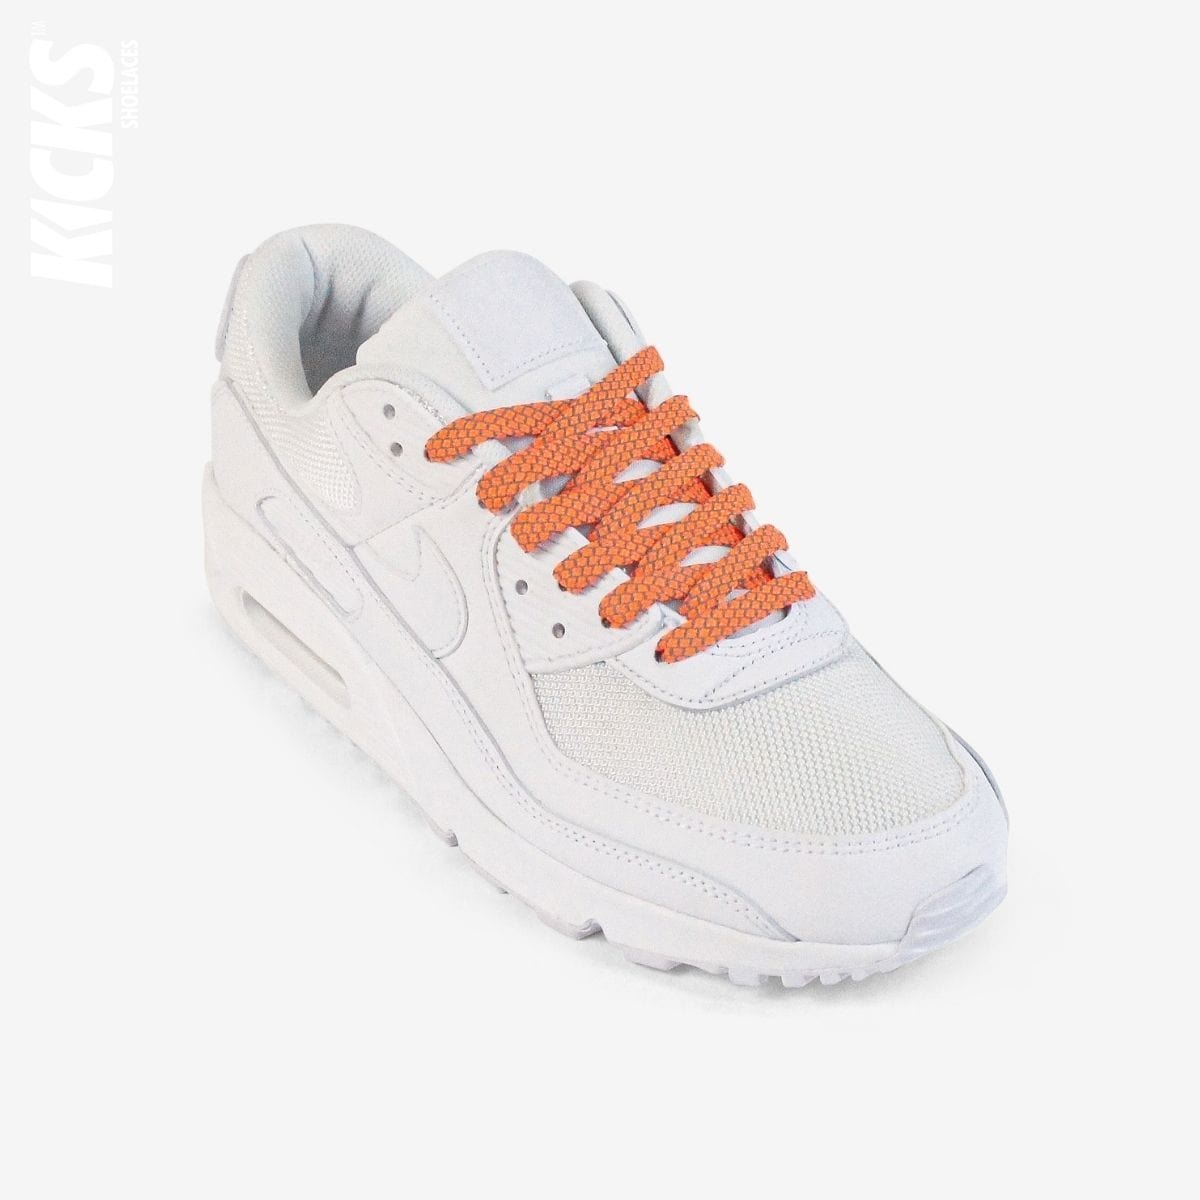 orange-reflective-colored-shoelaces-on-white-sneakers